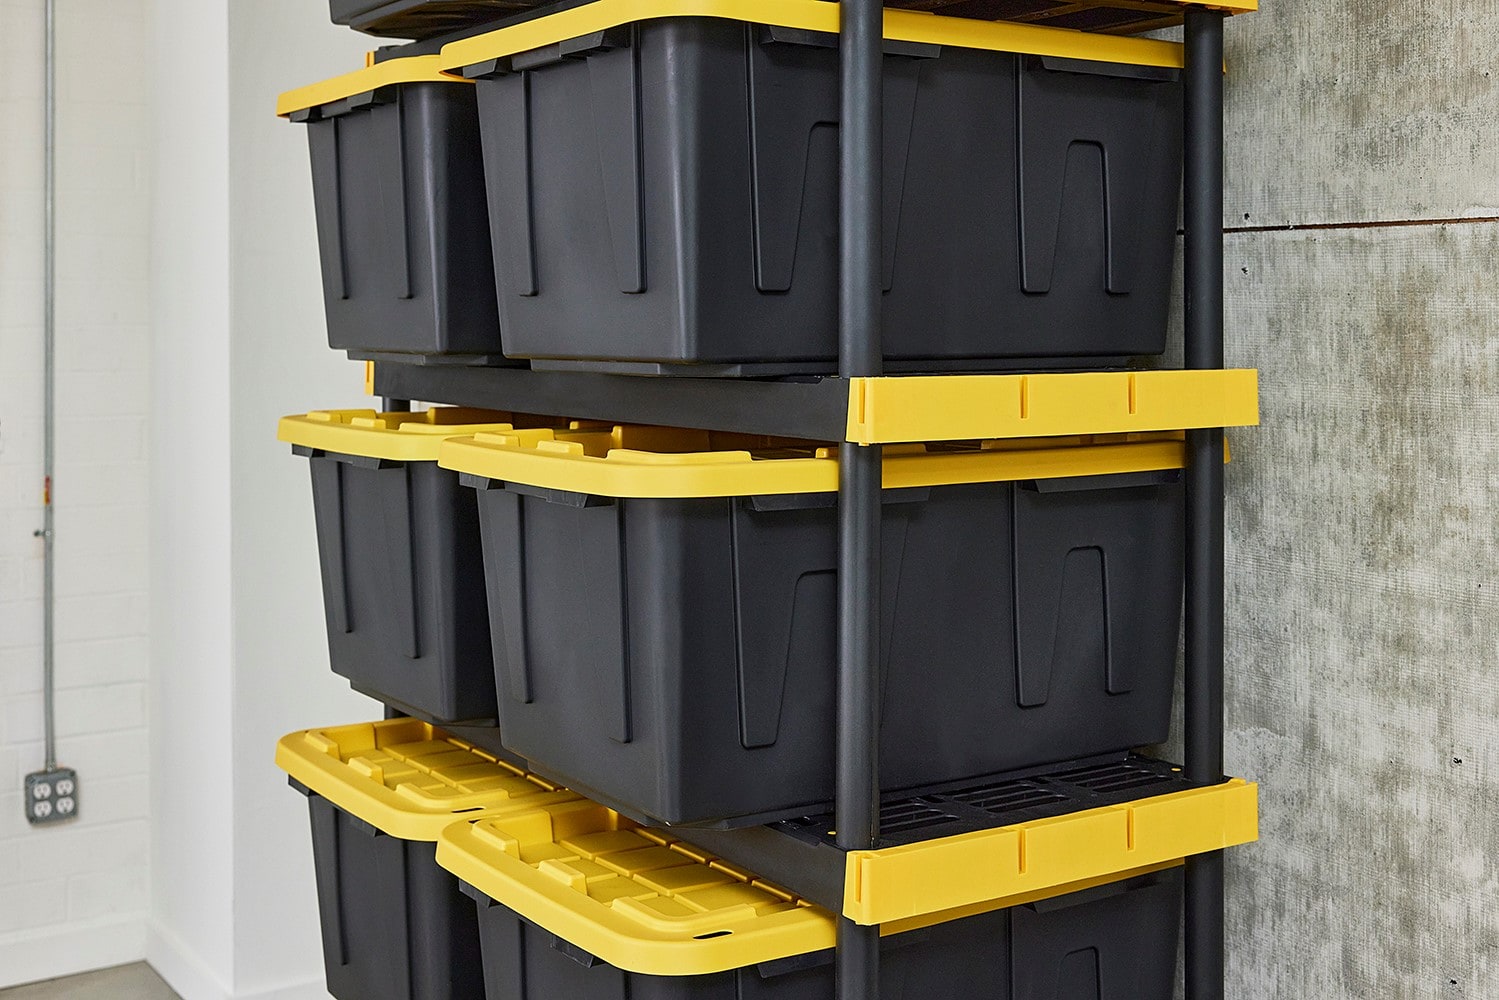 Project Source Commander Plastic Storage Container and Shelf Collection